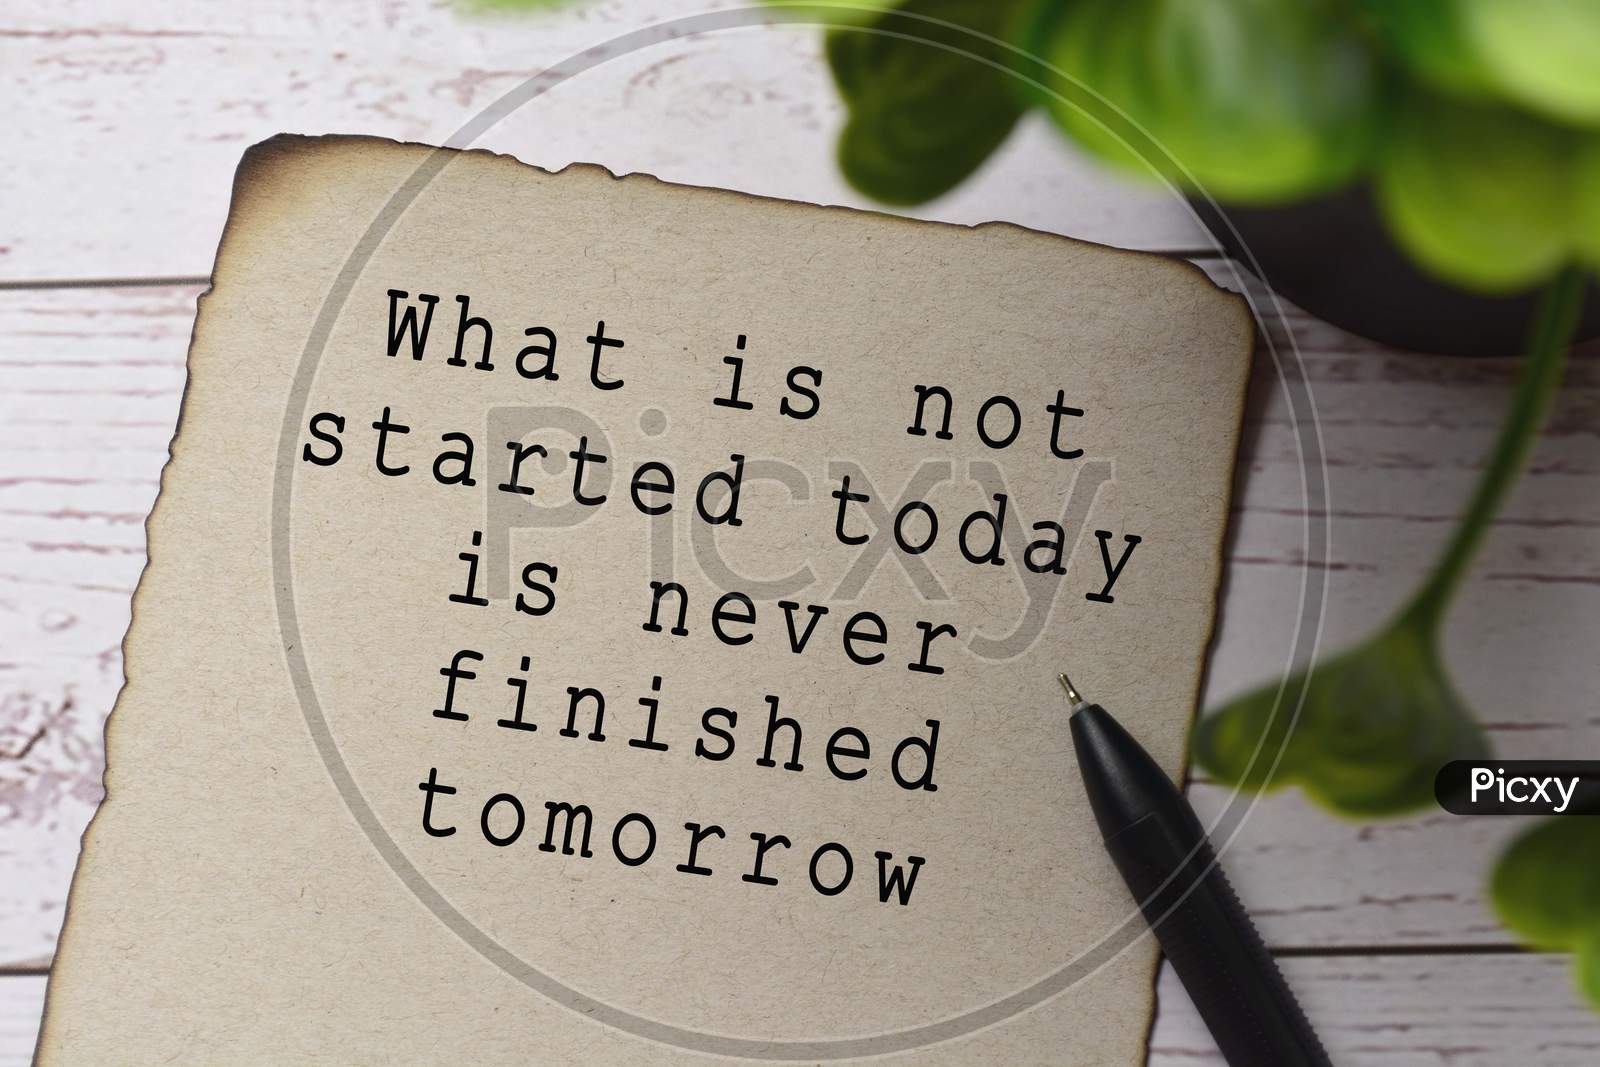 Motivational and inspirational quote on burnt edge brown paper with blurred green plant on wooden desk - What is not started today is never finished tomorrow